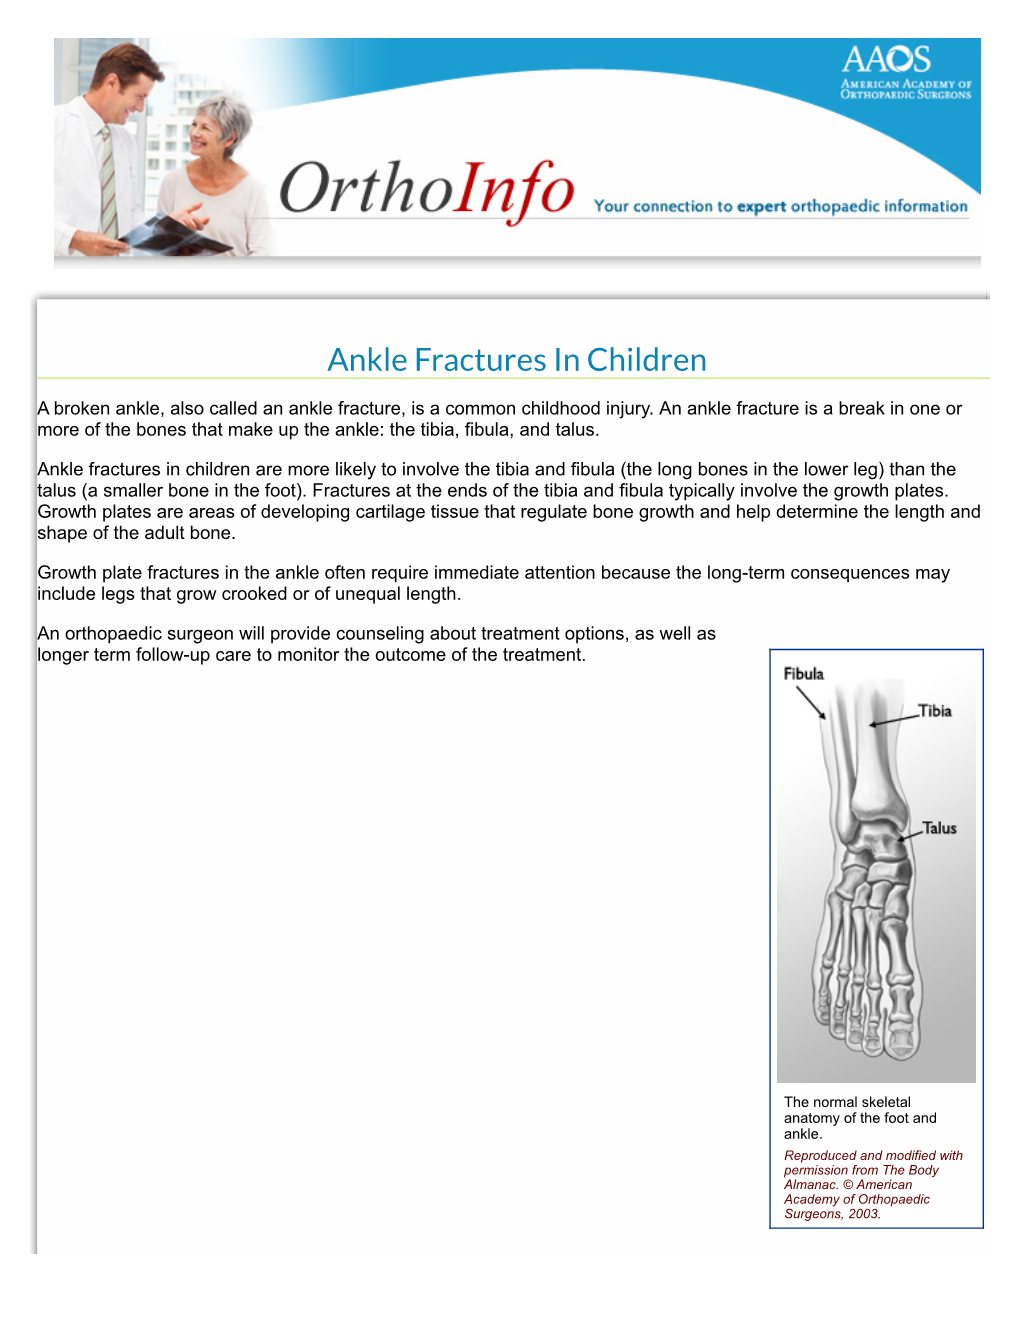 Ankle Fractures in Children-Orthoinfo